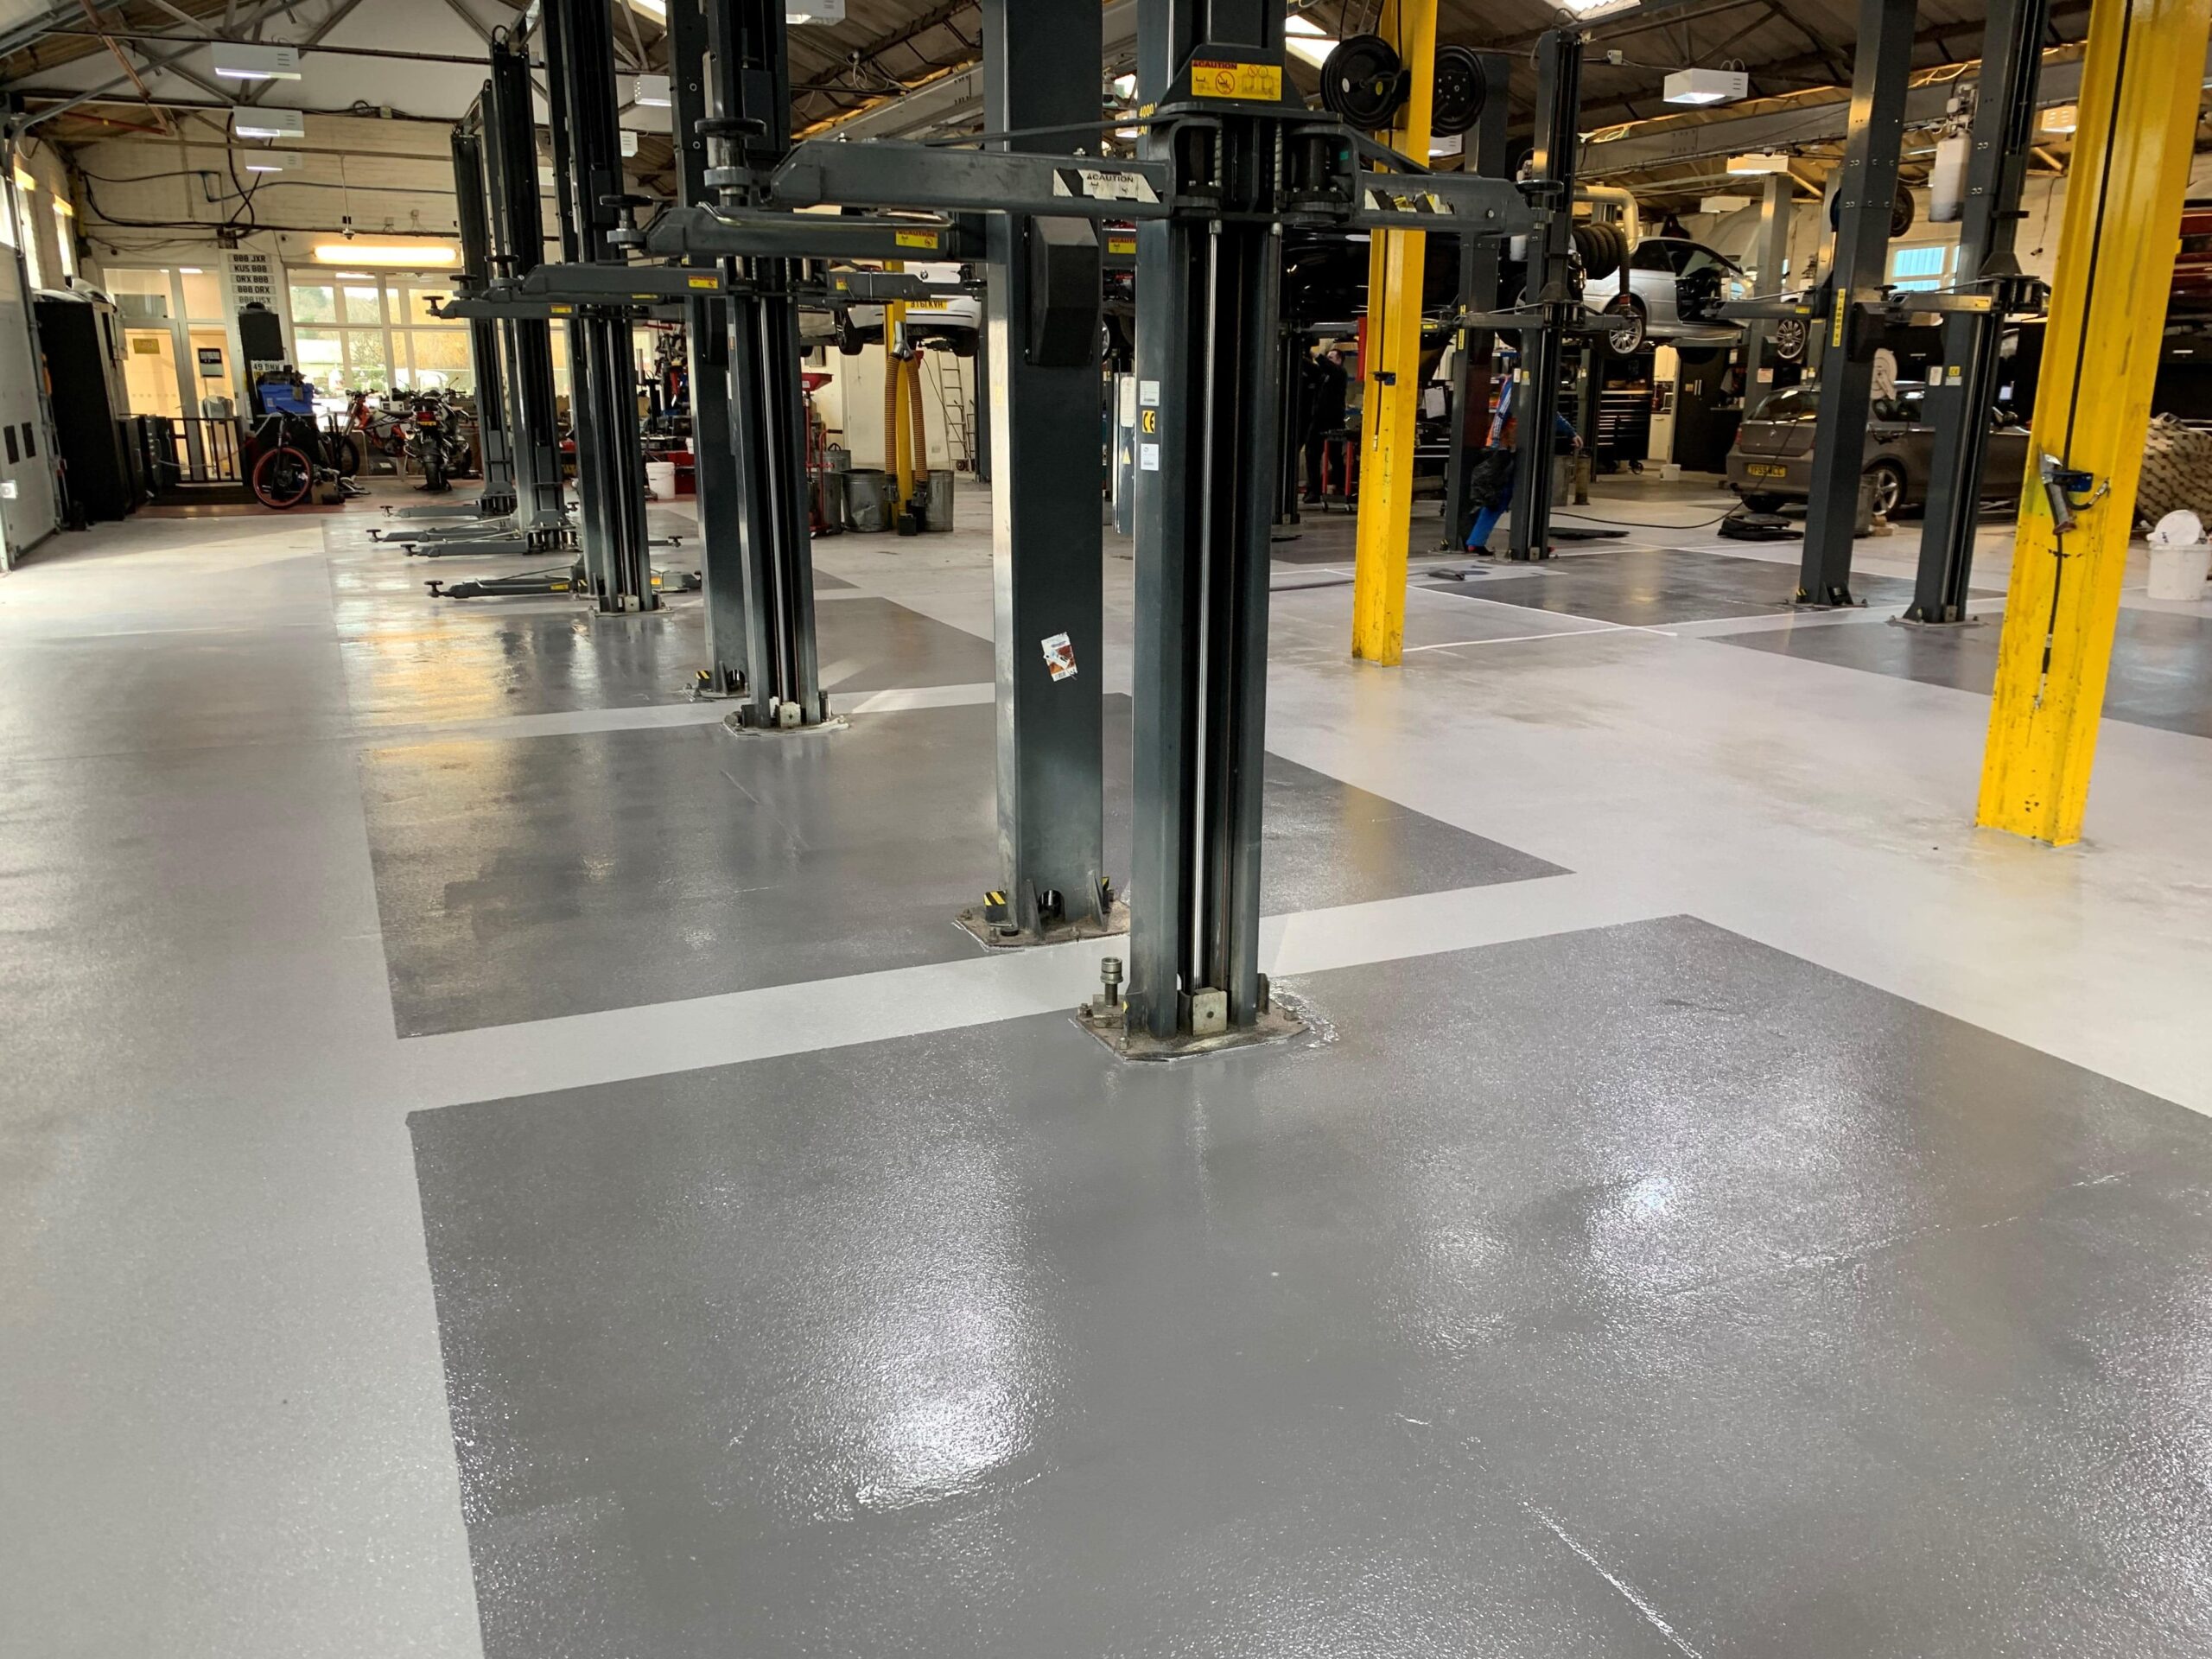 The cost-effectiveness of epoxy flooring allows the company to invest in other things.